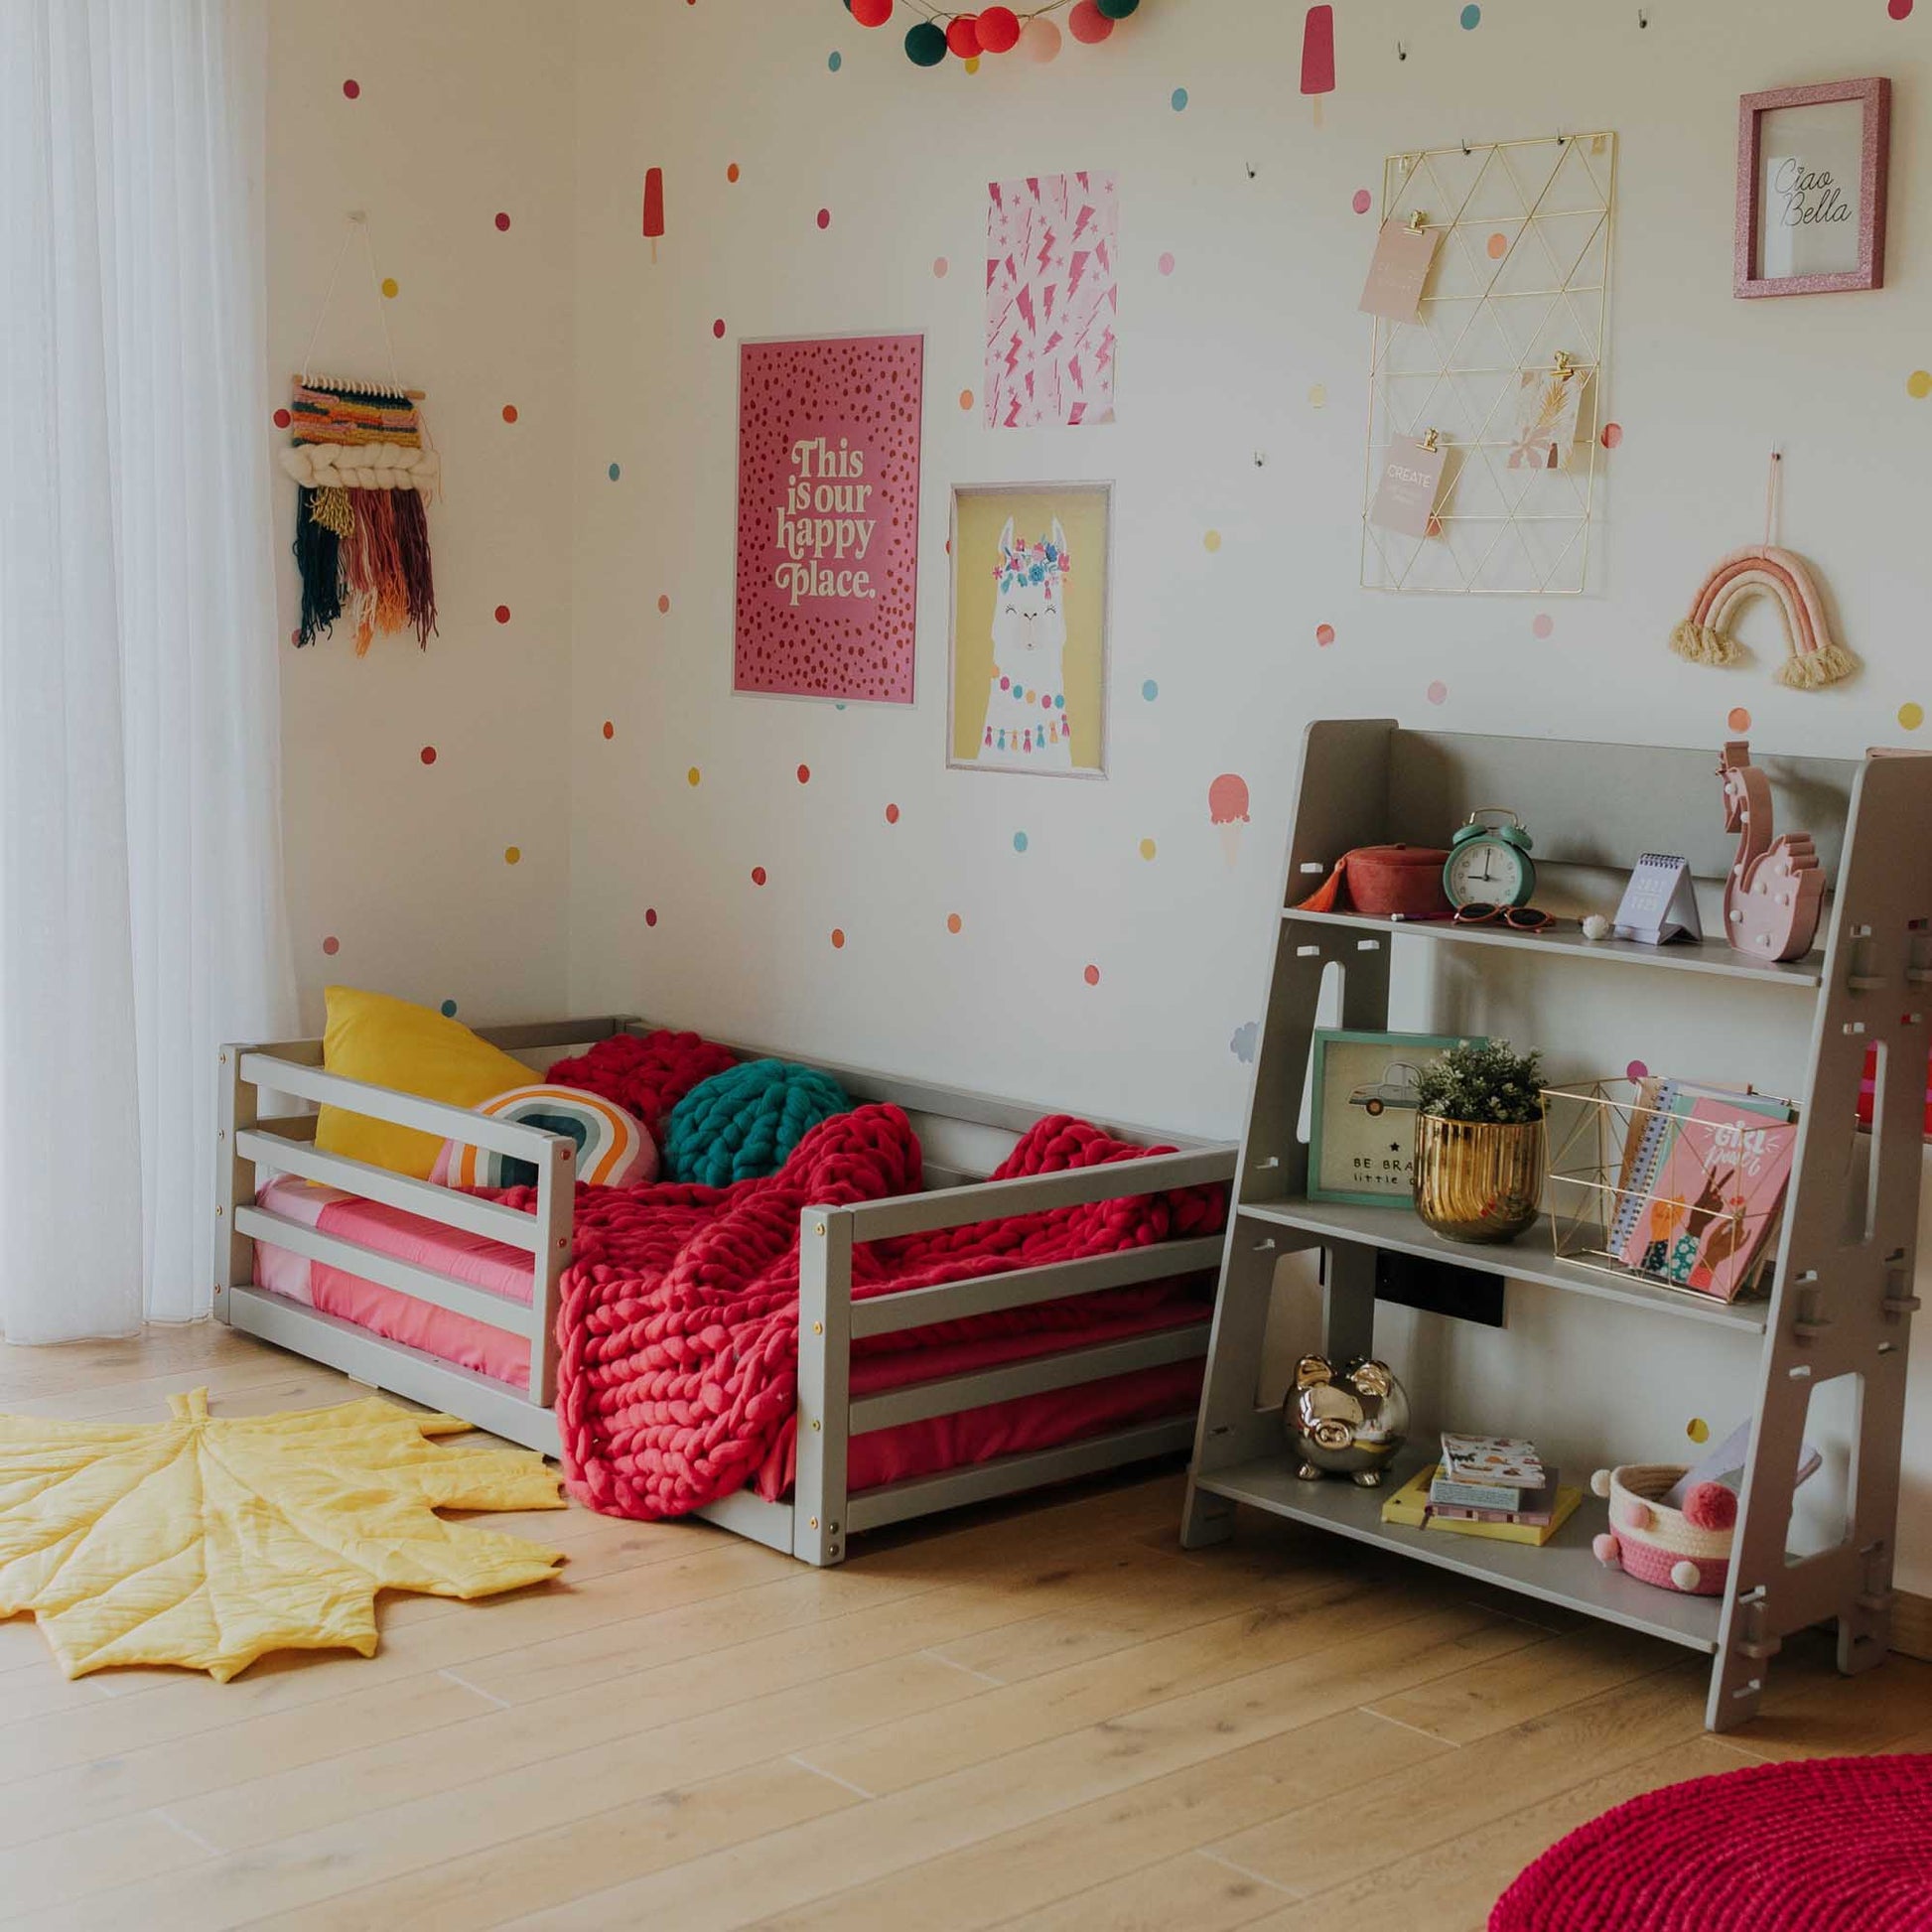 A child's room with a colorful polka dot wall and a Sweet Home From Wood 2-in-1 transformable kids' bed with a horizontal rail fence perfect for boys.